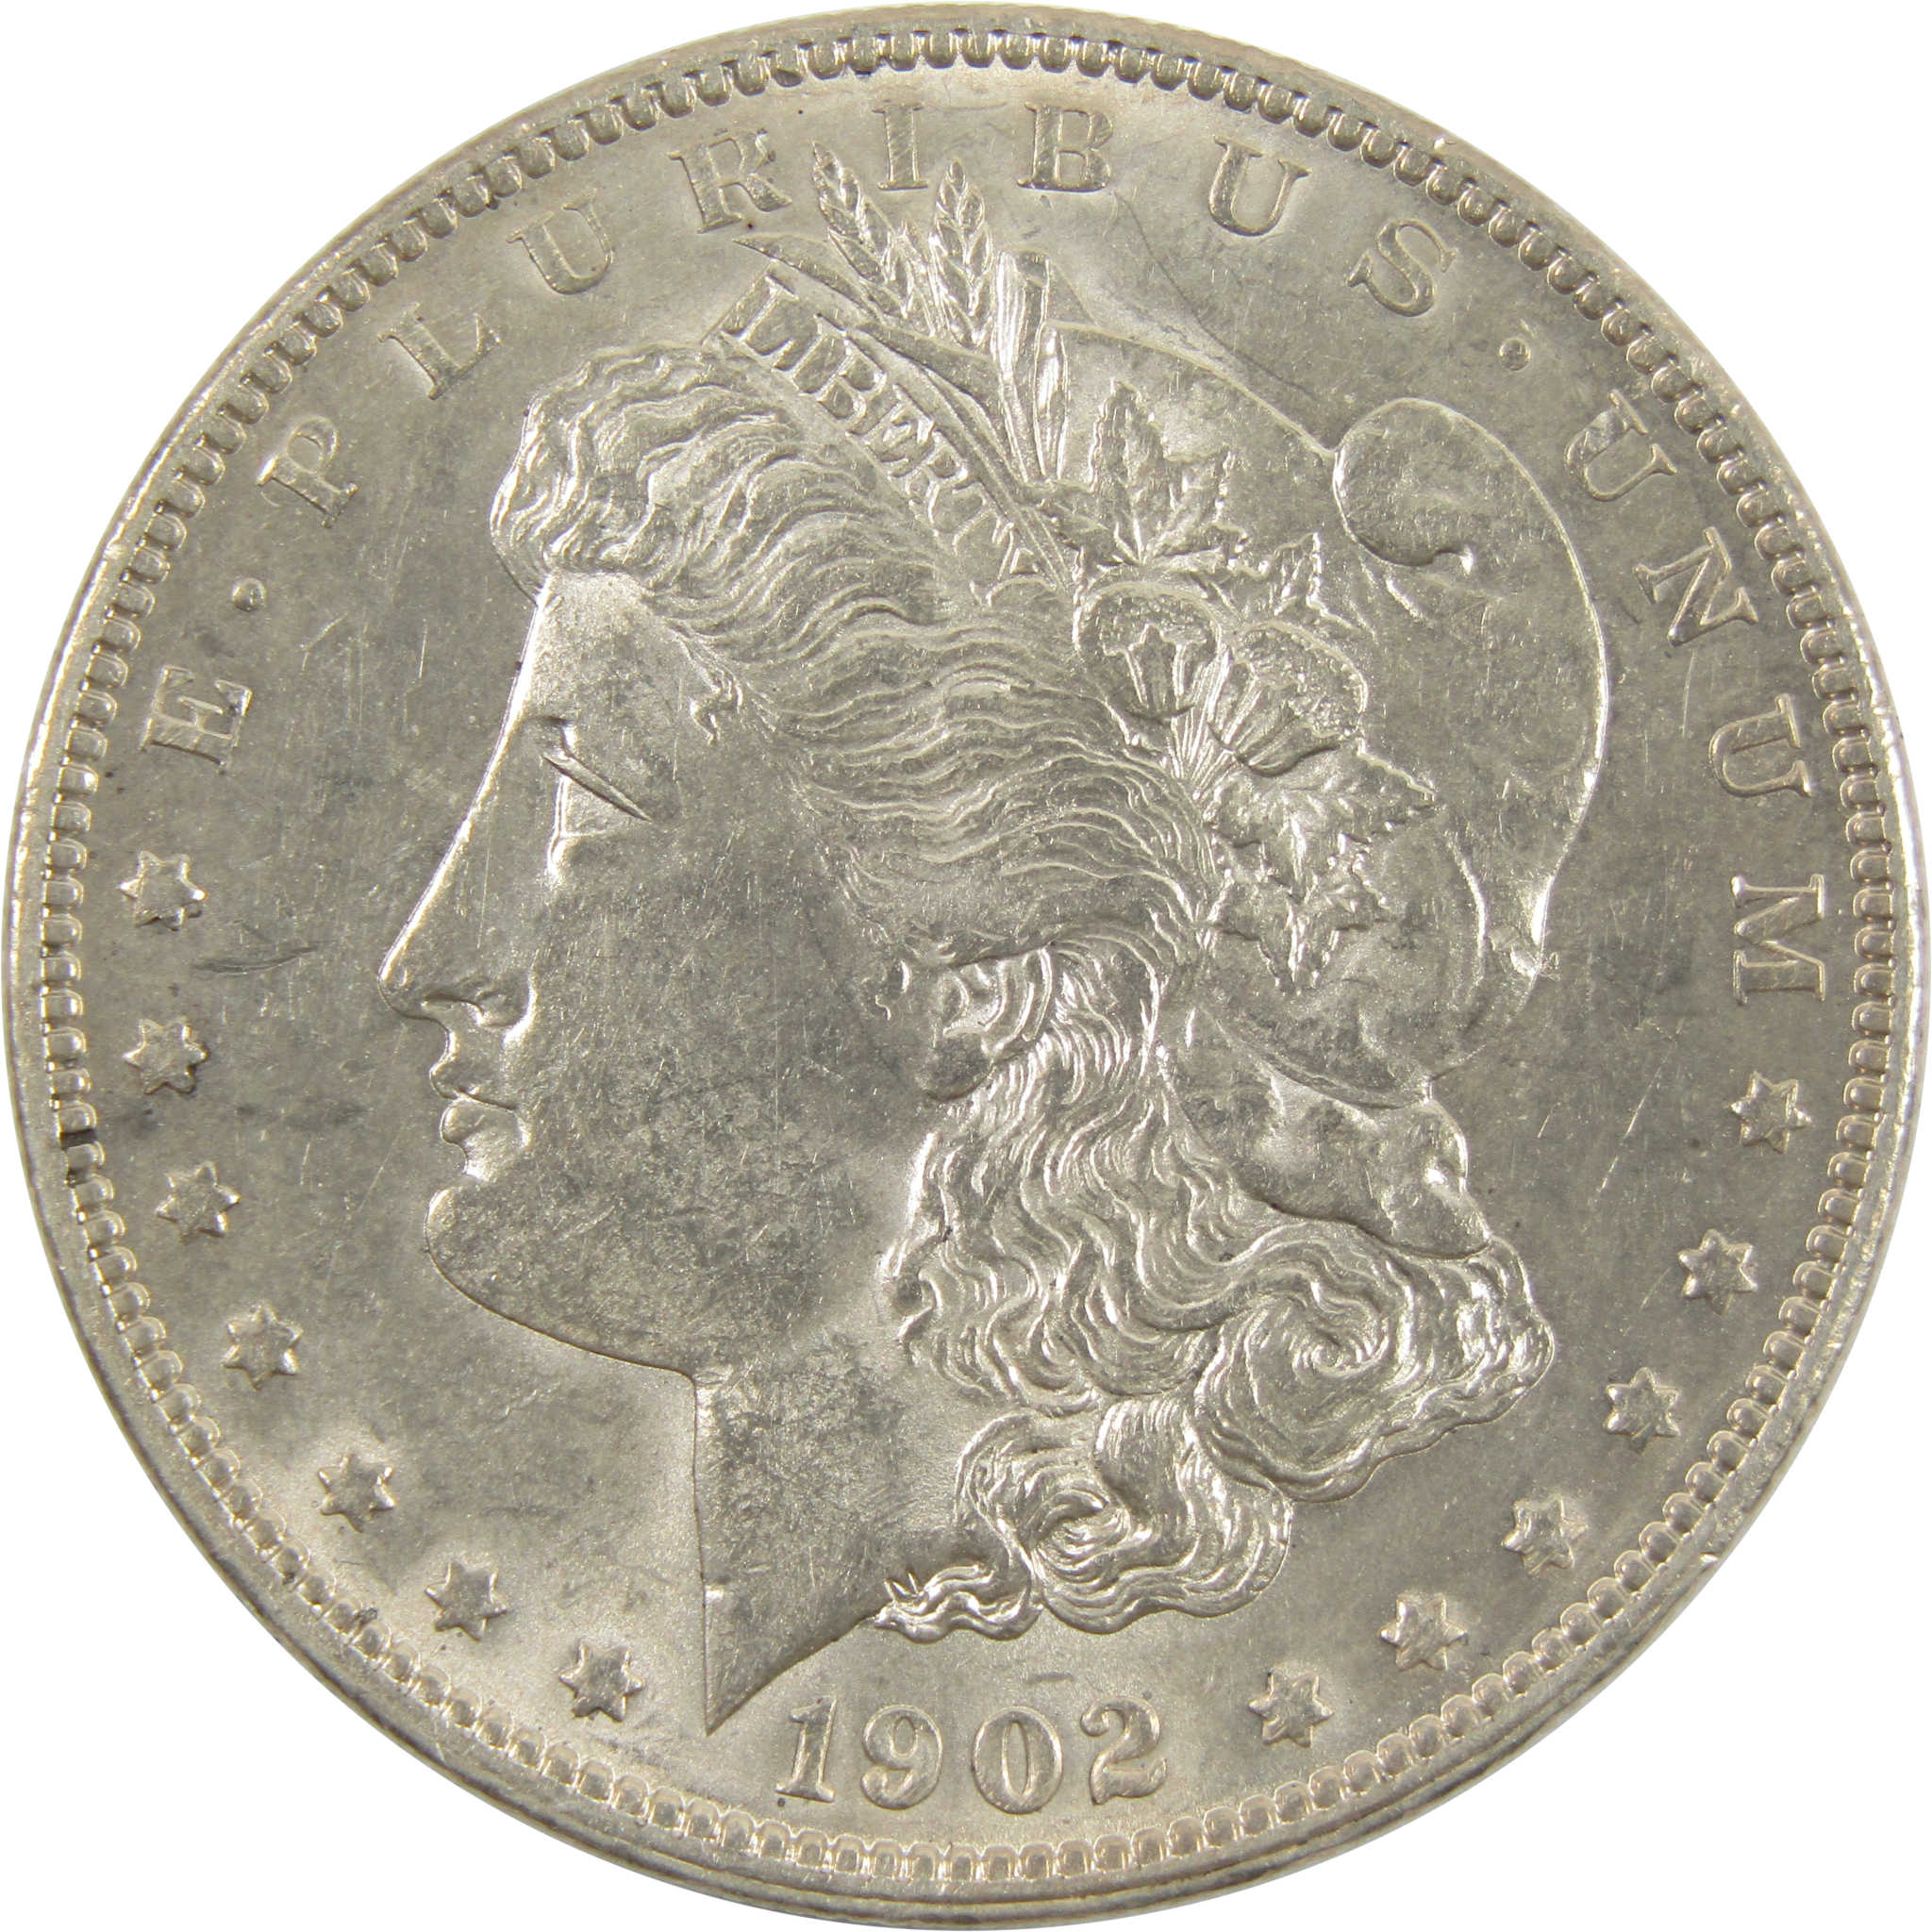 1902 Morgan Dollar XF EF Extremely Fine 90% Silver $1 Coin SKU:I11211 - Morgan coin - Morgan silver dollar - Morgan silver dollar for sale - Profile Coins &amp; Collectibles